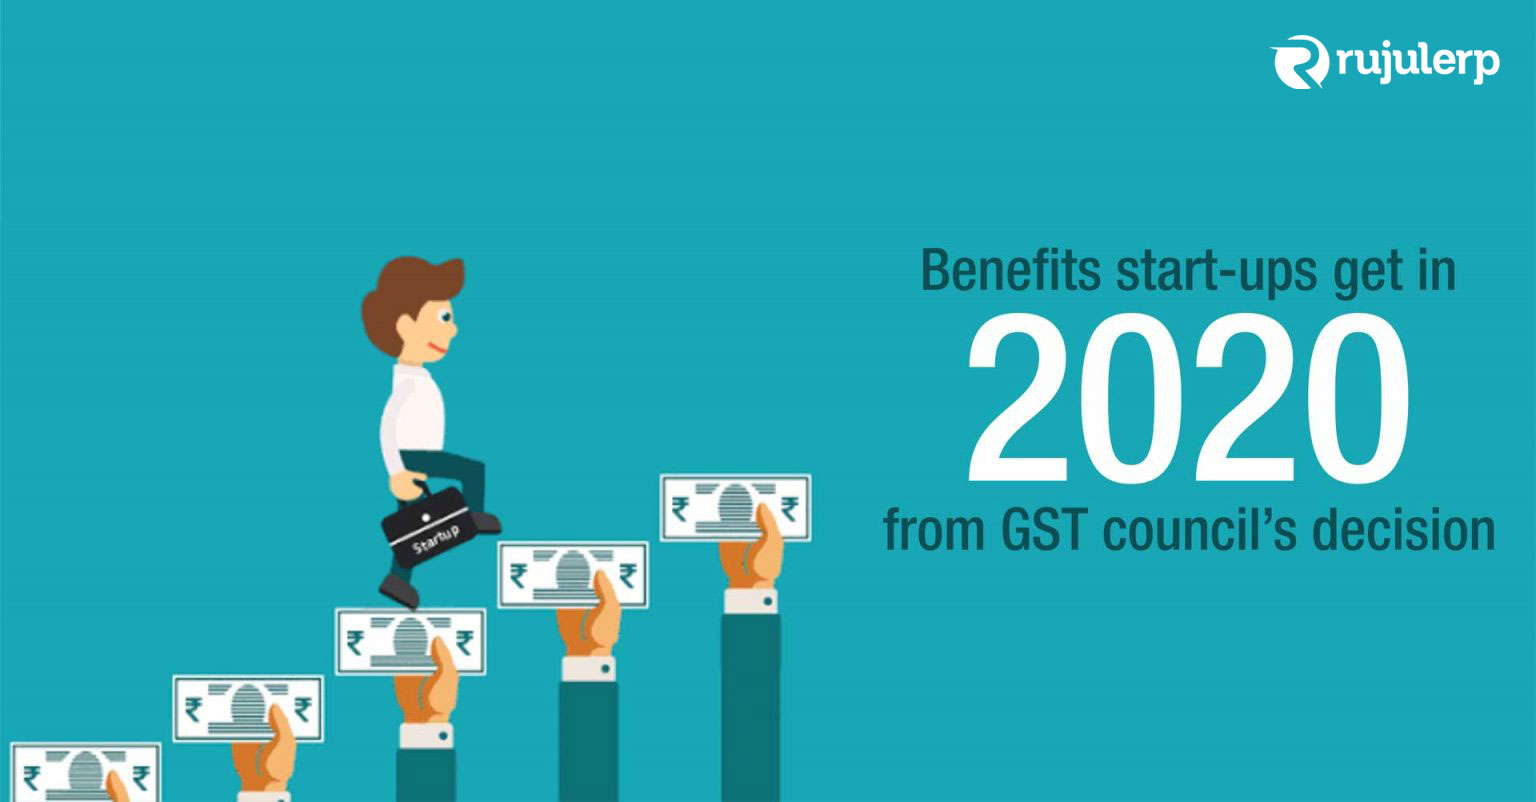 5 benefits start-ups get in 2020 from GST council’s decision